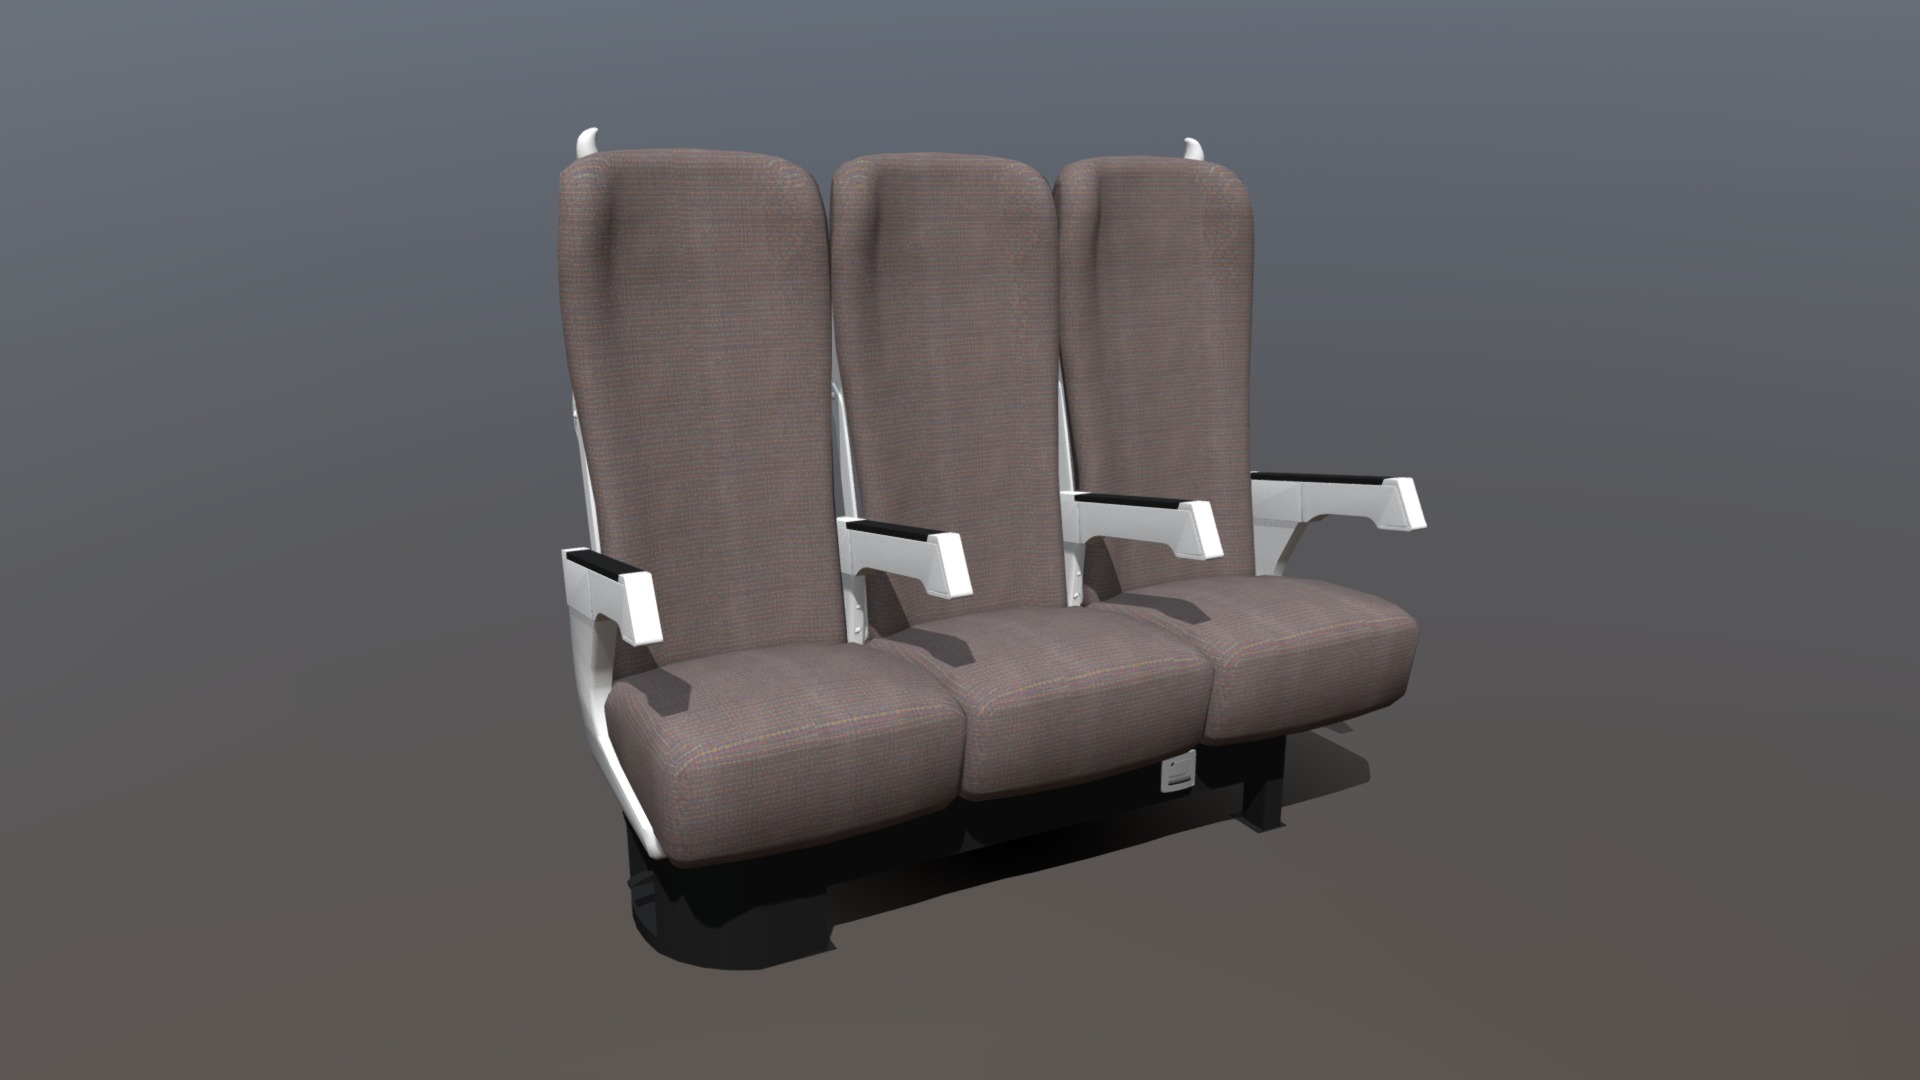 3D model Train seat 018 - This is a 3D model of the Train seat 018. The 3D model is about a group of chairs.